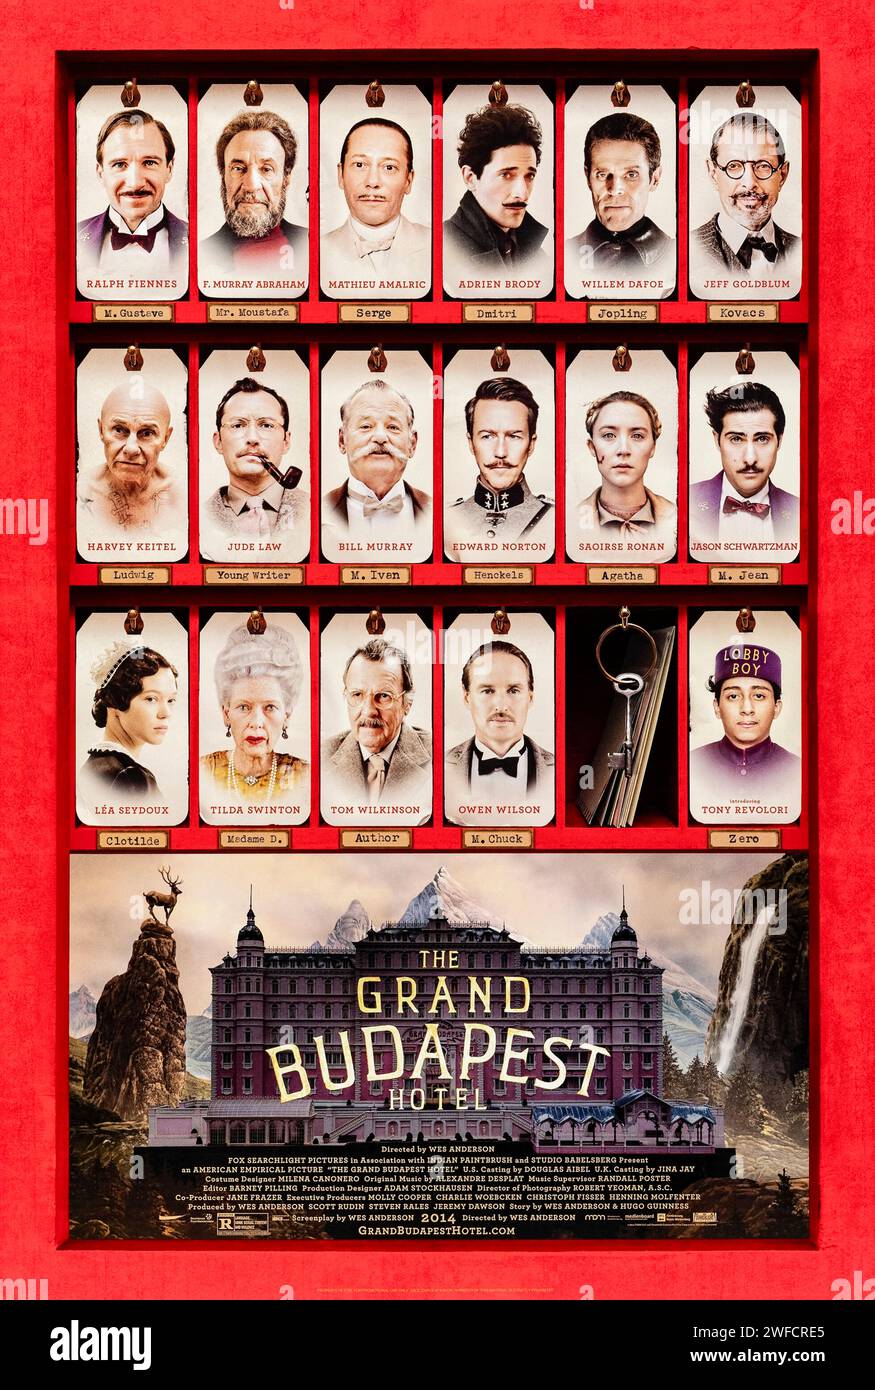 The Grand Budapest Hotel (2012) directed by Wes Anderson and starring Ralph Fiennes, F. Murray Abraham and Mathieu Amalric. Award winning comedy starring an ensemble cast about a hotel concierge who is framed for murder and must prove his innocence. Photograph of an original 2012 US one sheet poster. ***EDITORIAL USE ONLY*** Credit: BFA / Fox Searchlight Pictures Stock Photo